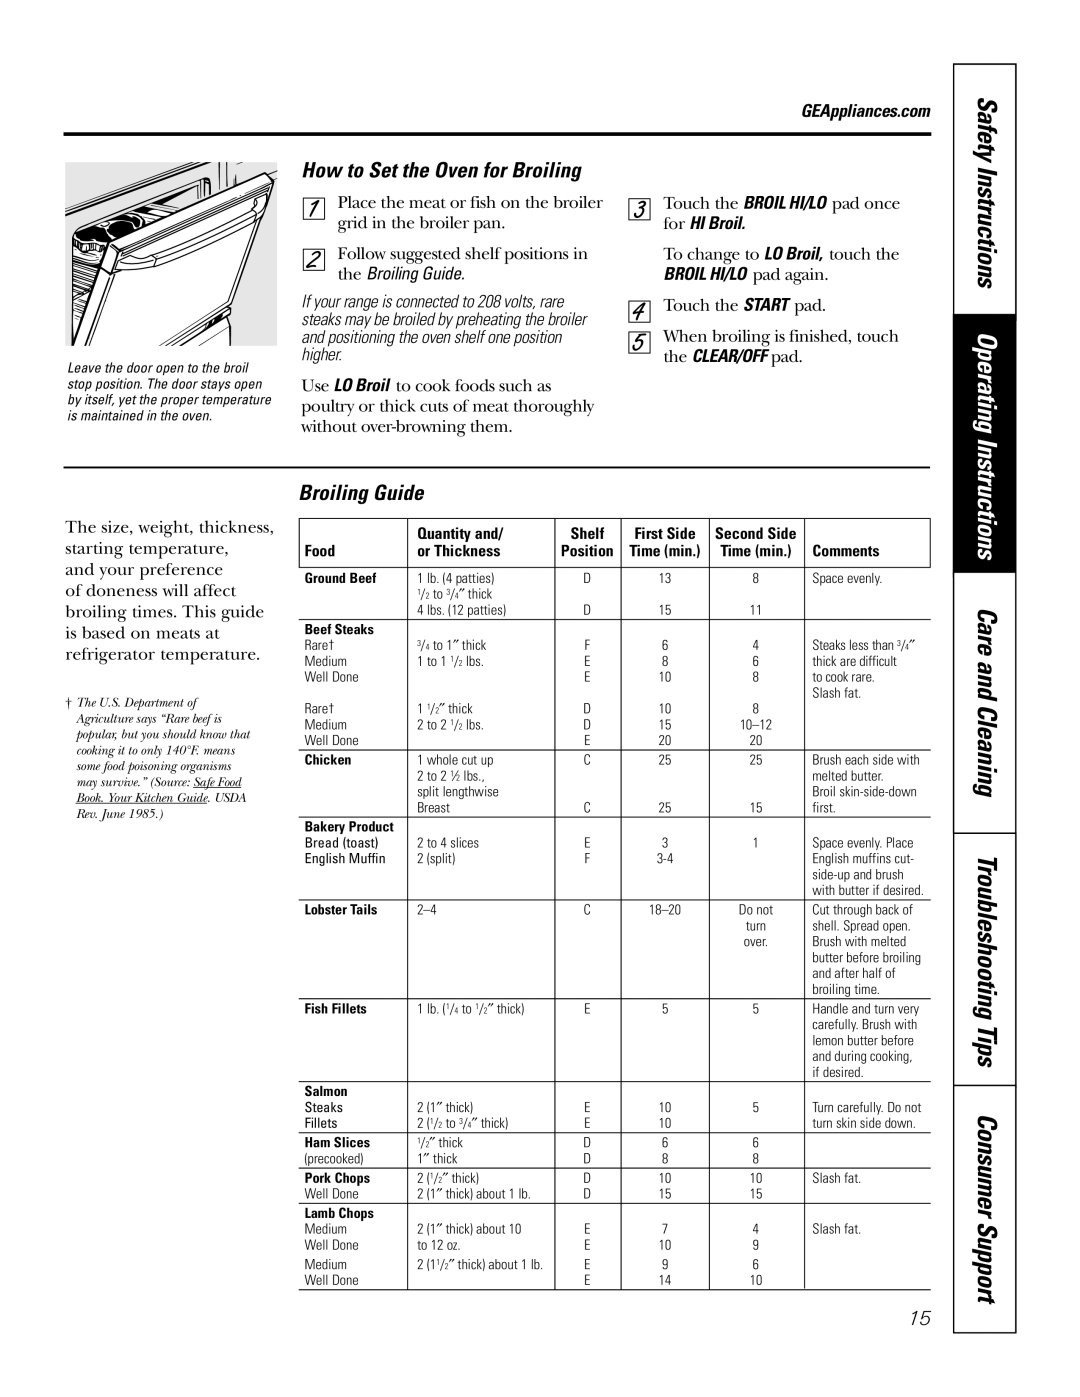 GE JBP91 Instructions Operating, Instructions Care and Cleaning Troubleshooting Tips Consumer Support, Safety, Shelf, Food 